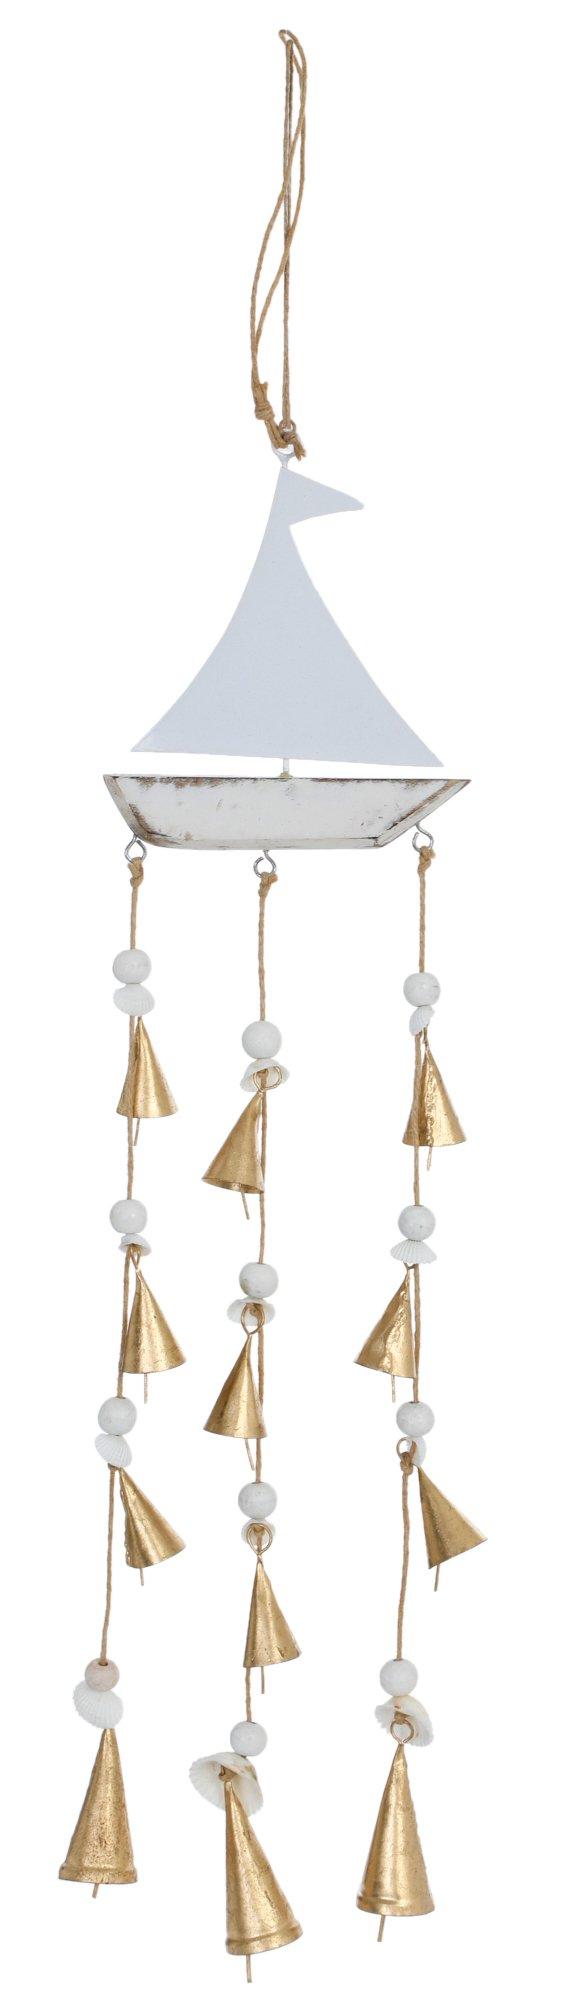 31 in. Sailboat Bamboo Wind Chimes